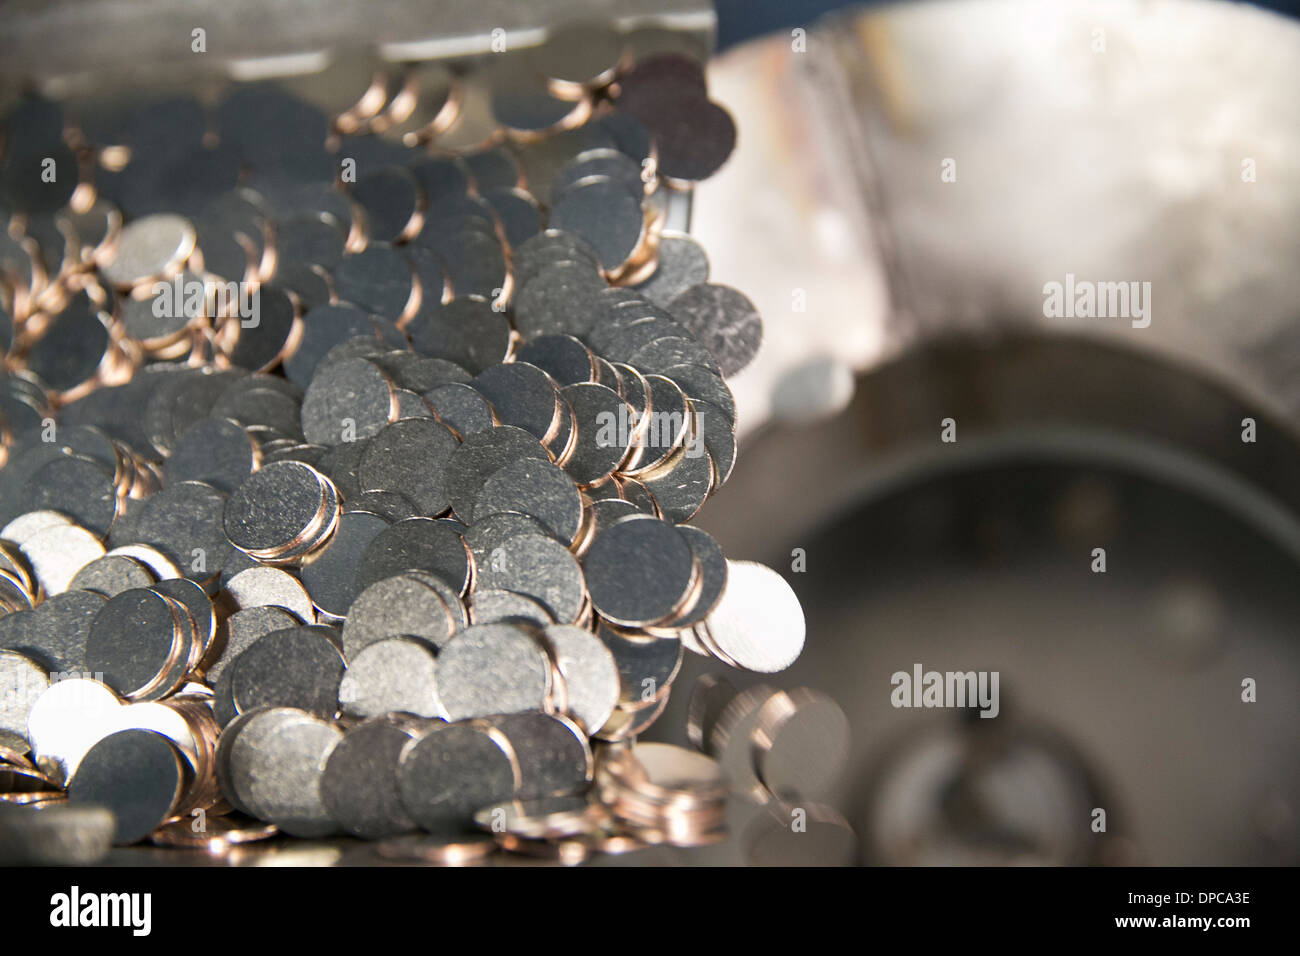 Quarter manufacturing at the Philadelphia branch of the United States Mint.  Stock Photo